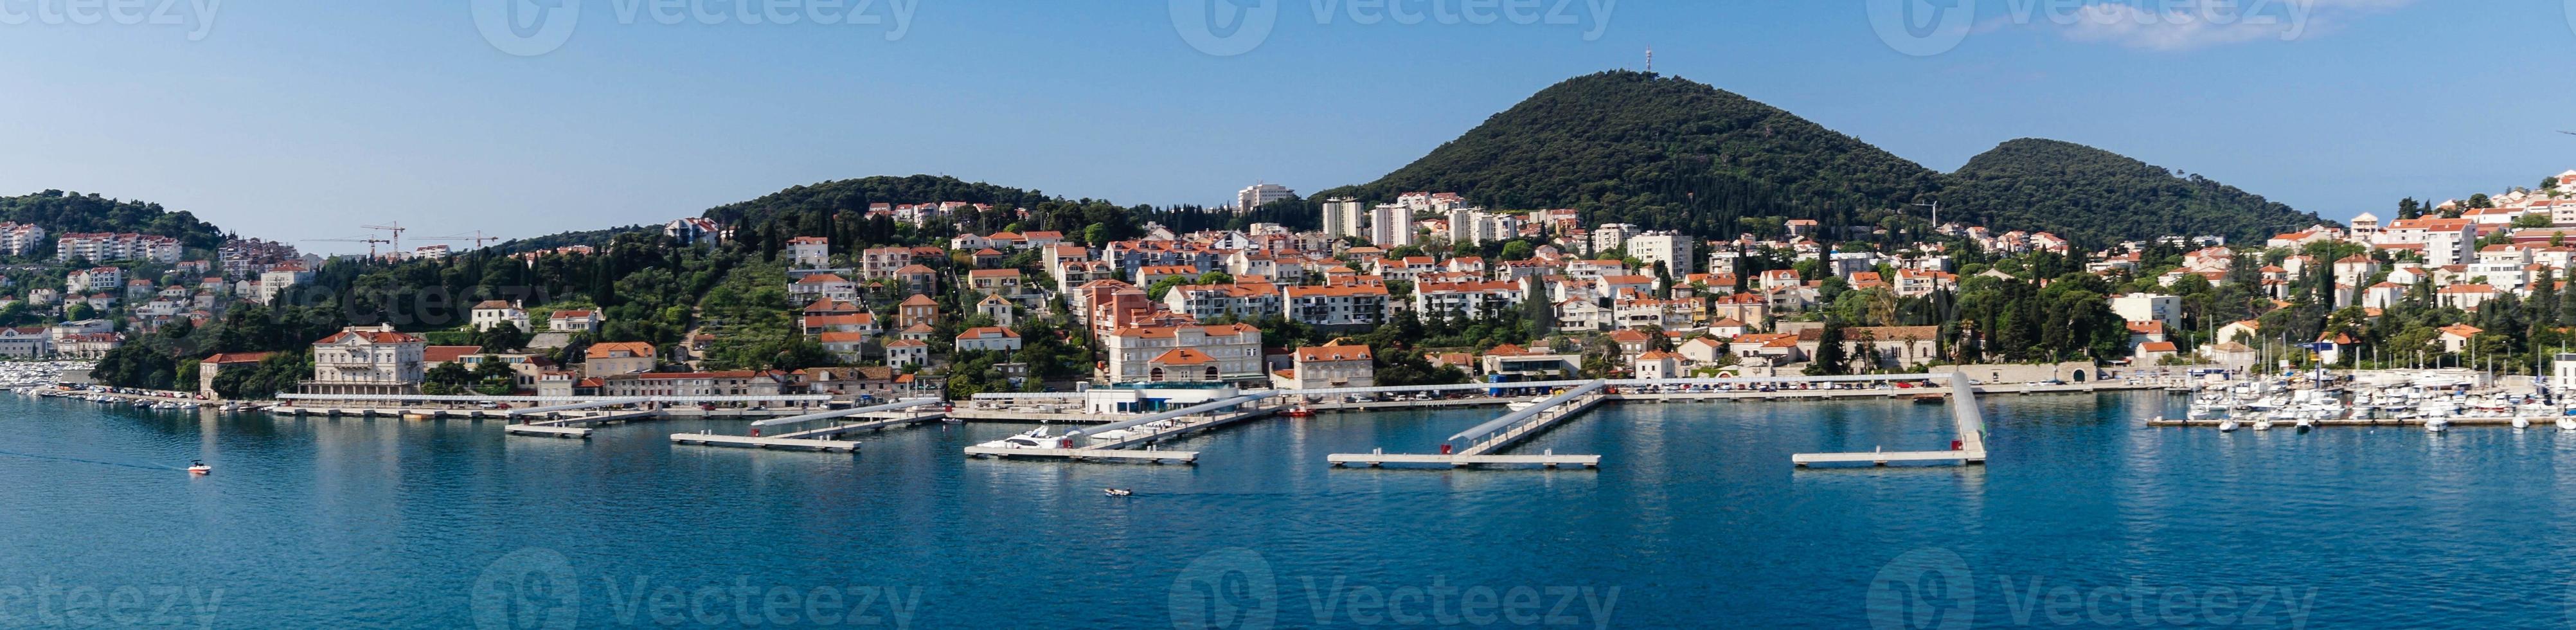 the new port of Dubrovnik photo